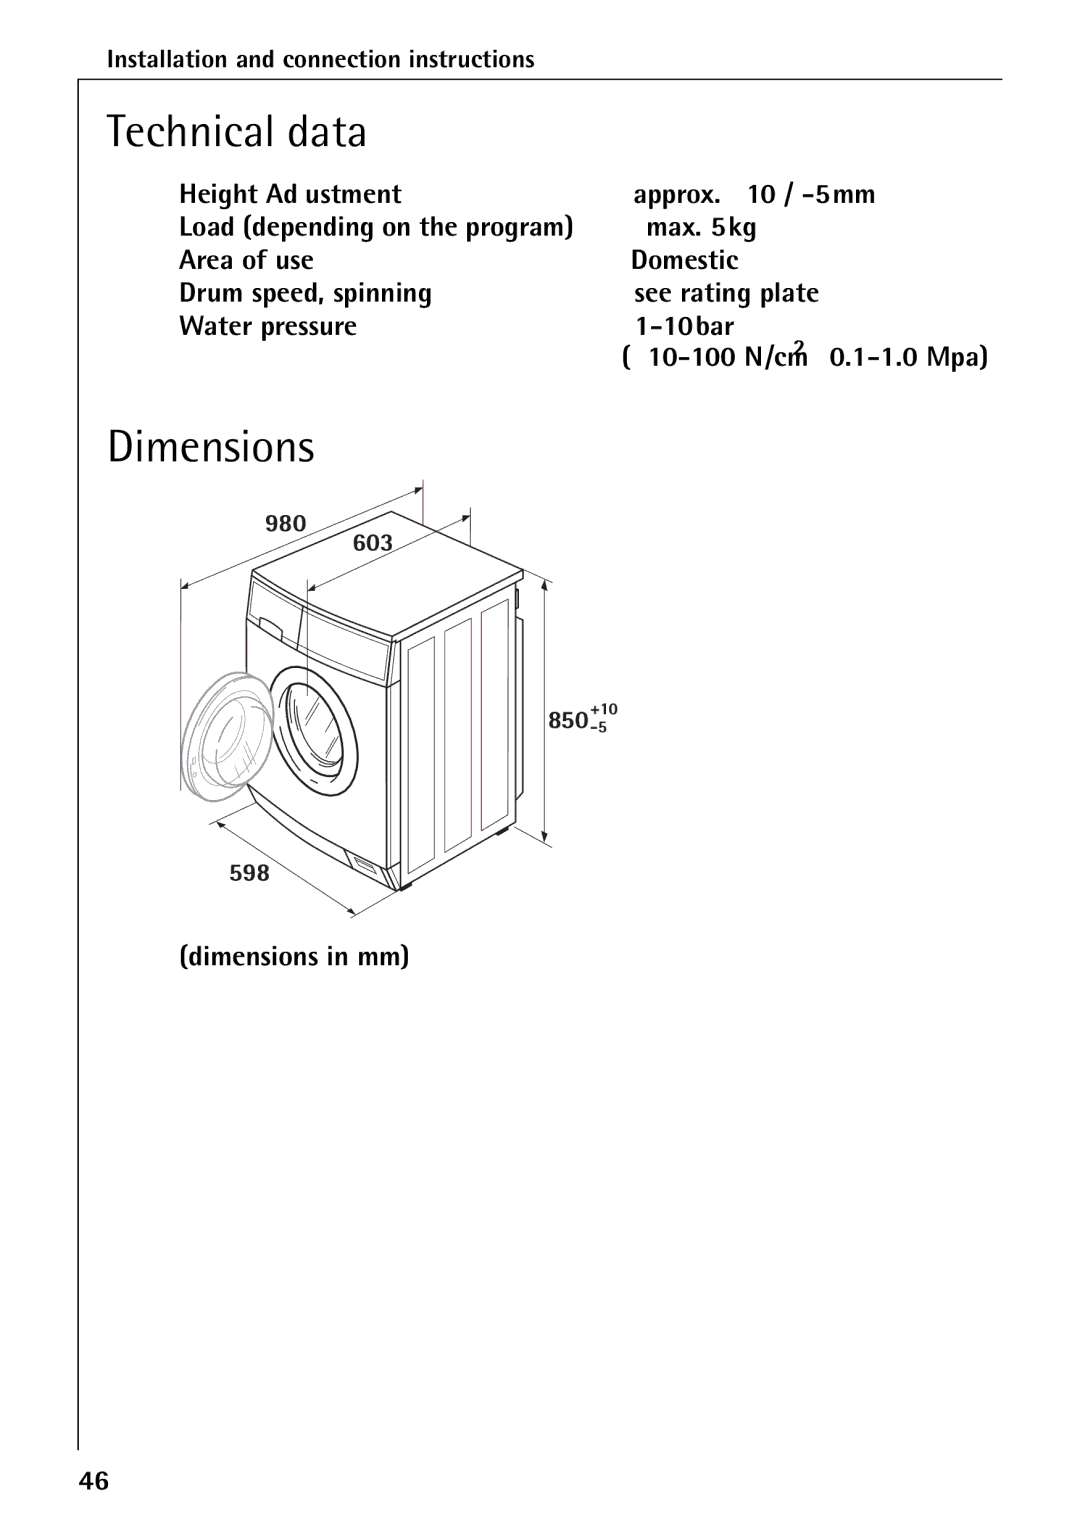 Electrolux 50630 manual Technical data, Dimensions in mm 